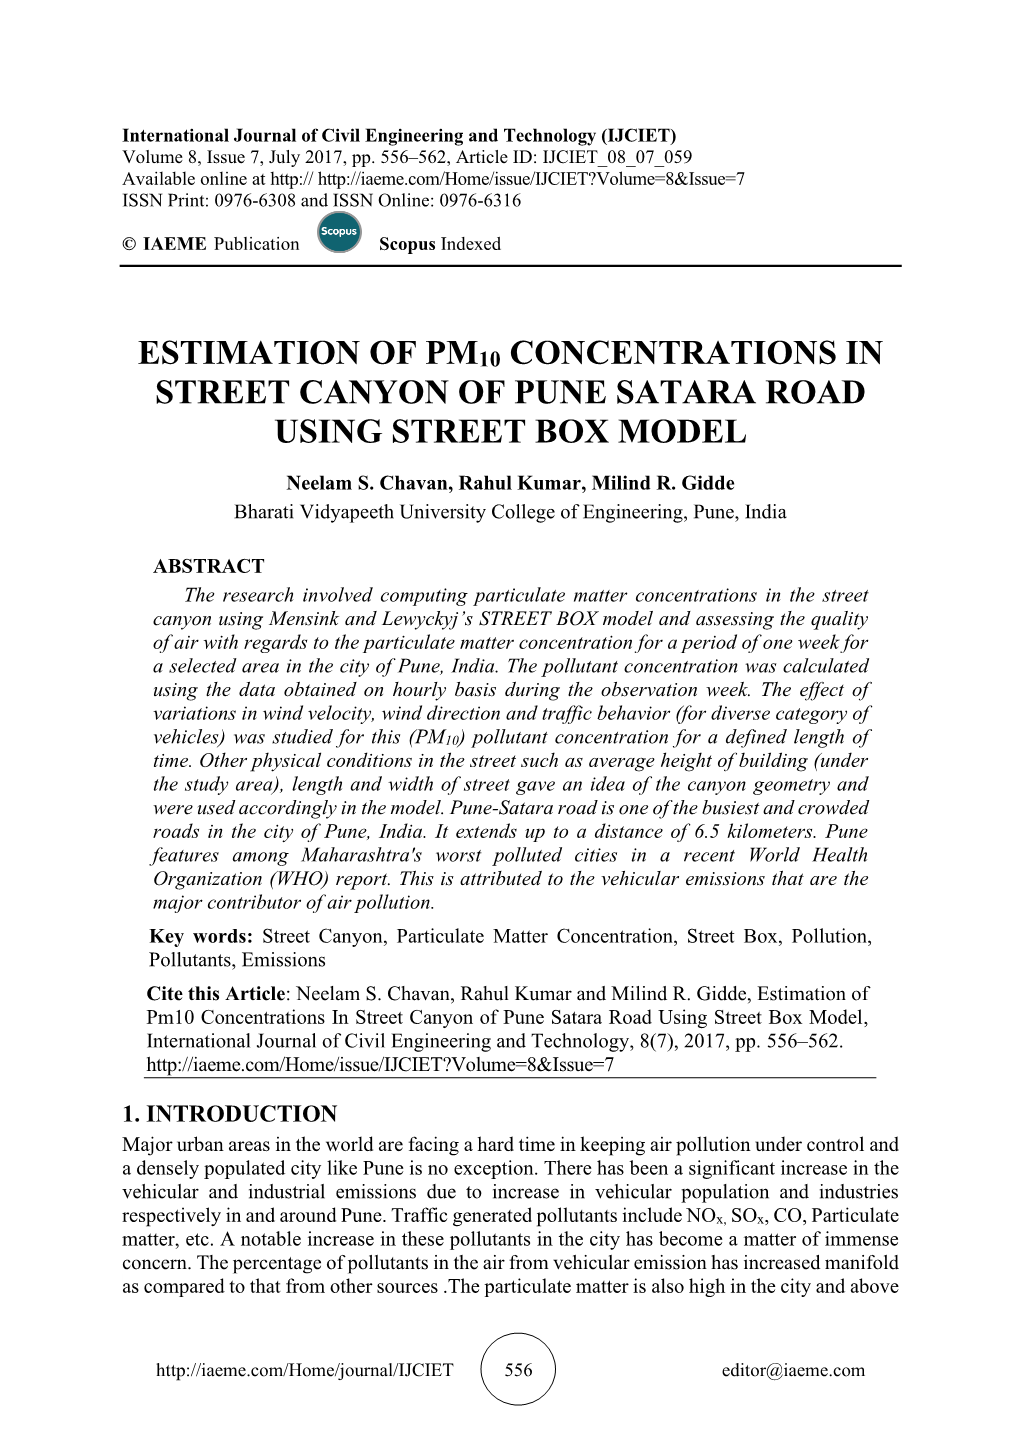 Estimation of Pm10 Concentrations in Street Canyon of Pune Satara Road Using Street Box Model